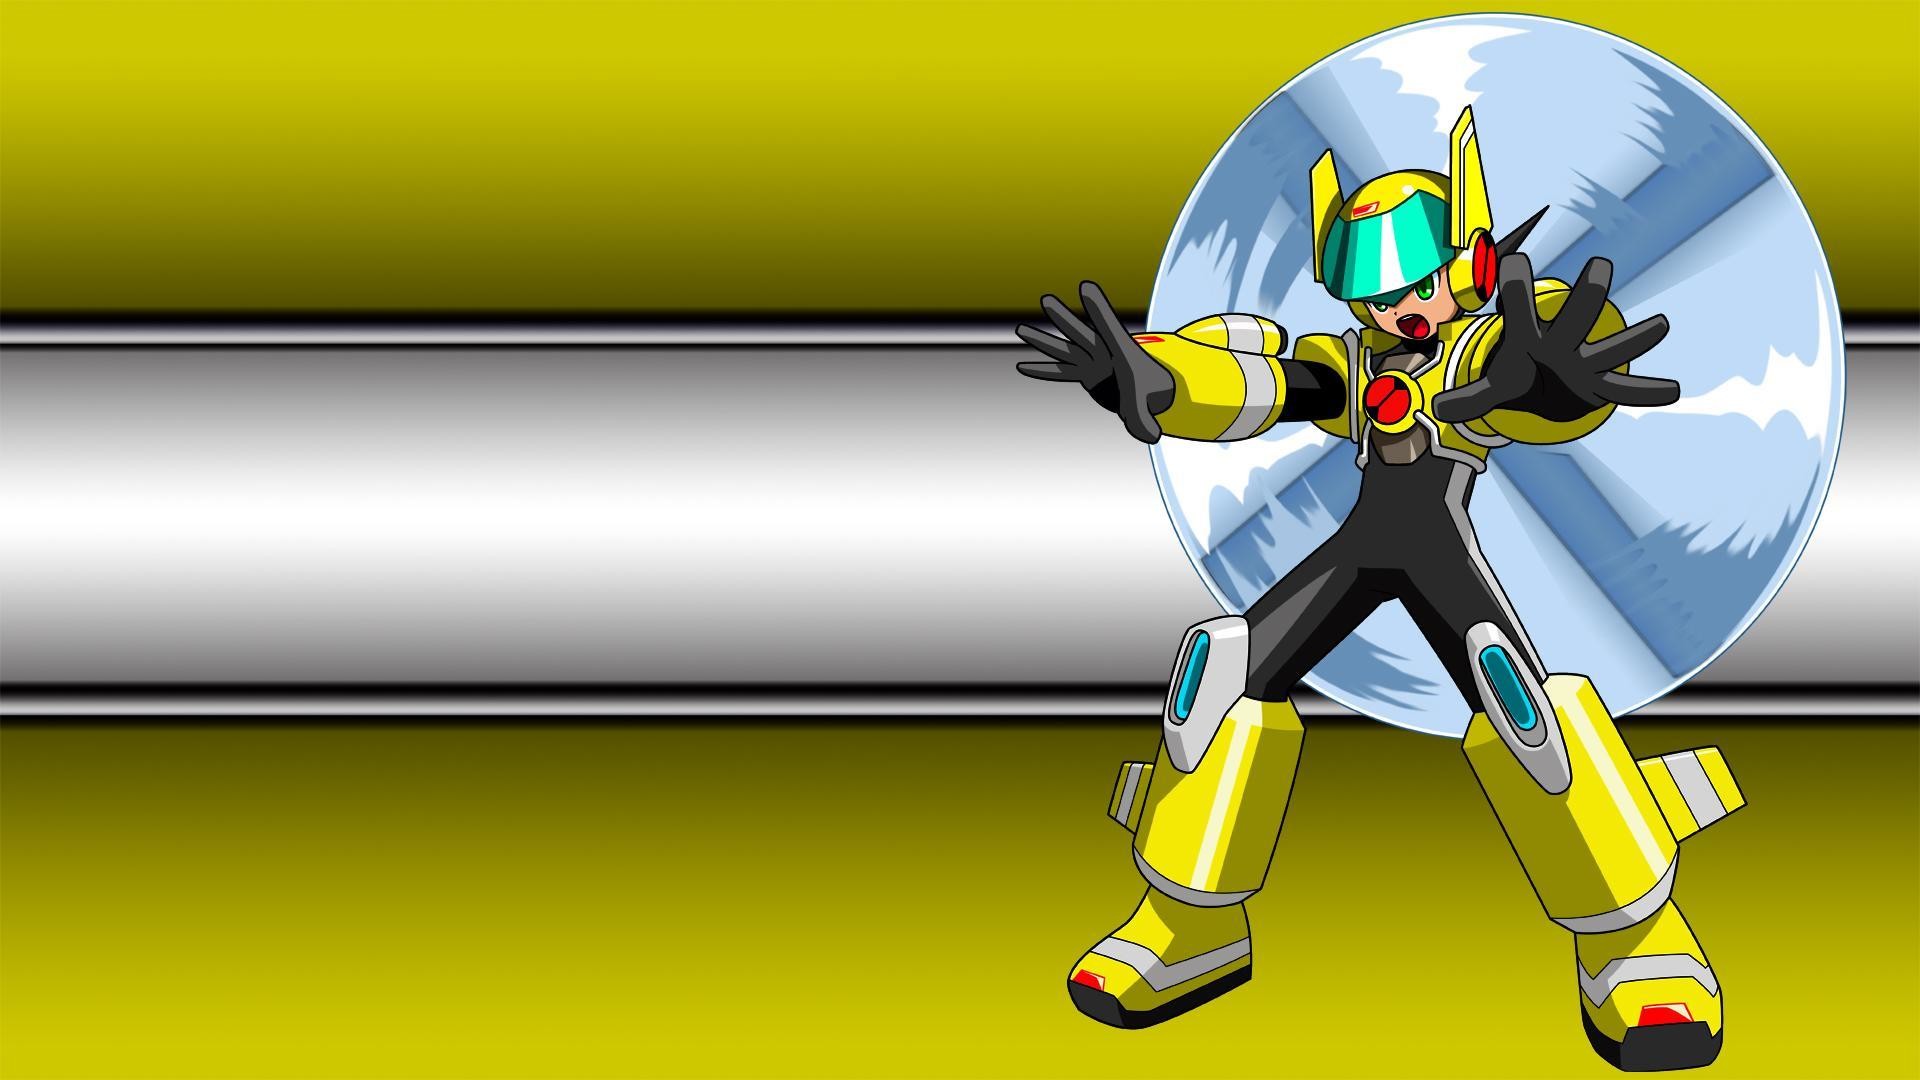 1920x1080 Related Wallpapers. Battle Network - Mega Man In Air Suit